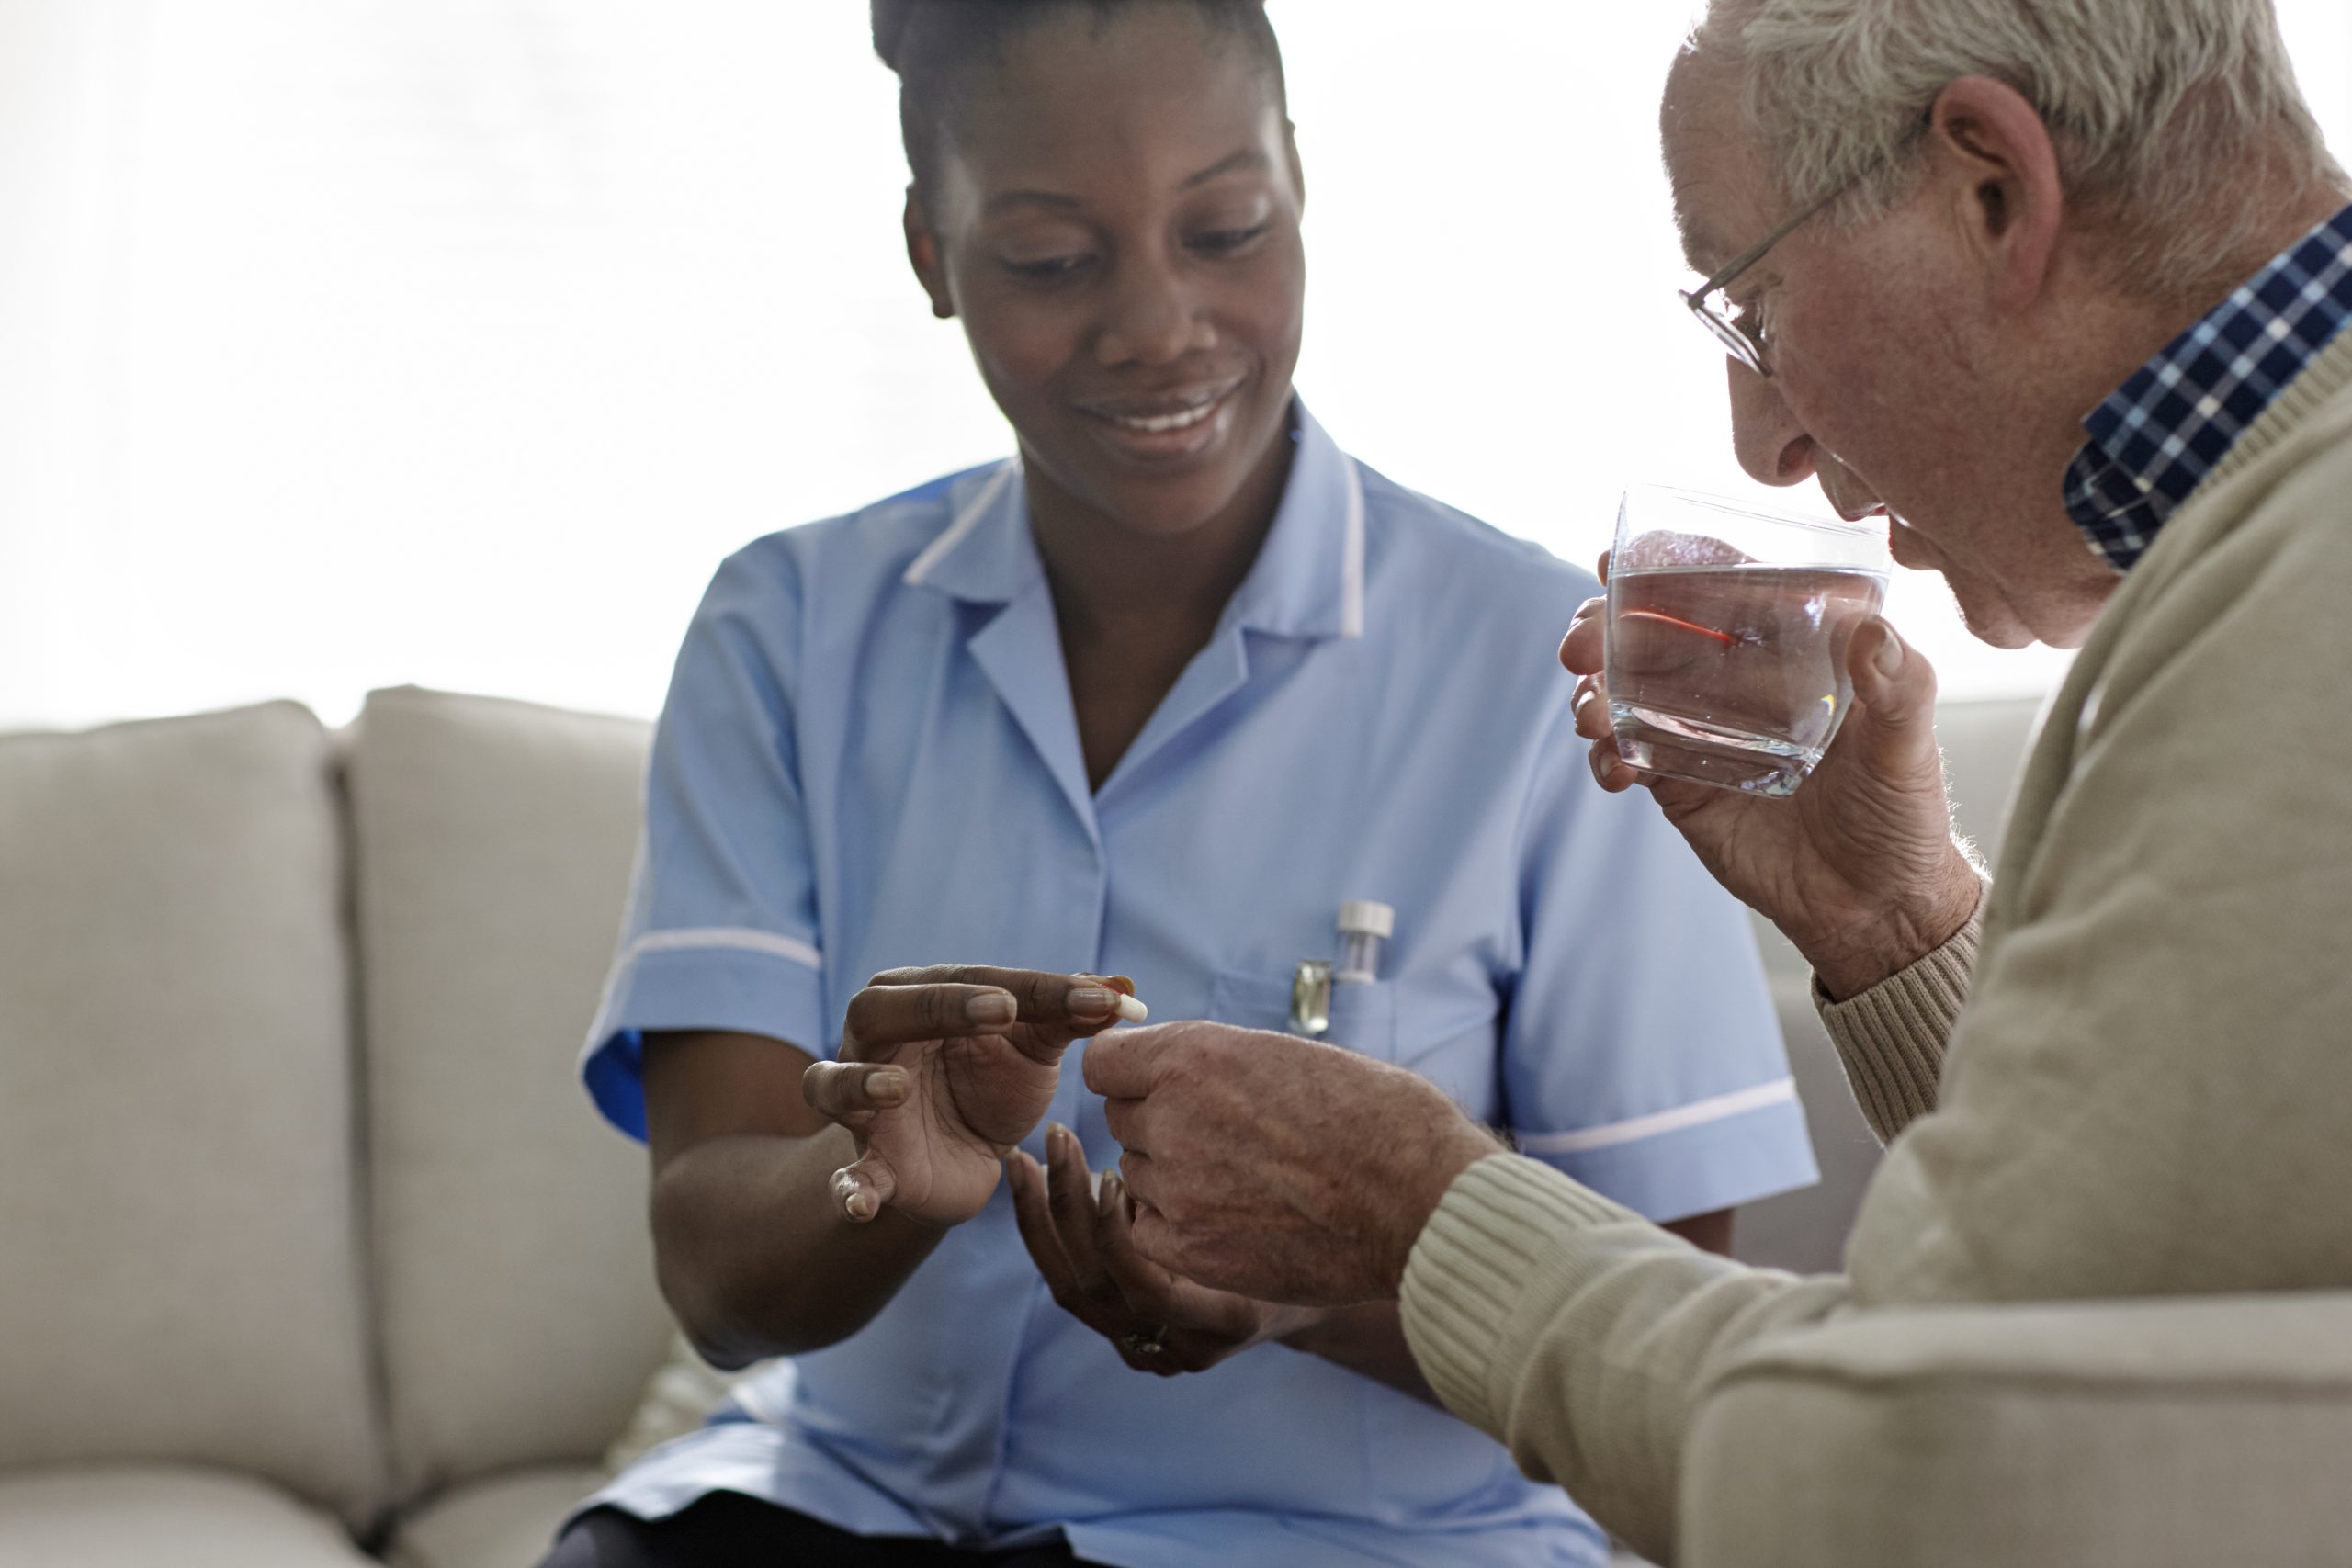 Female Doctor giving medication to elderly patient sitting on sofa